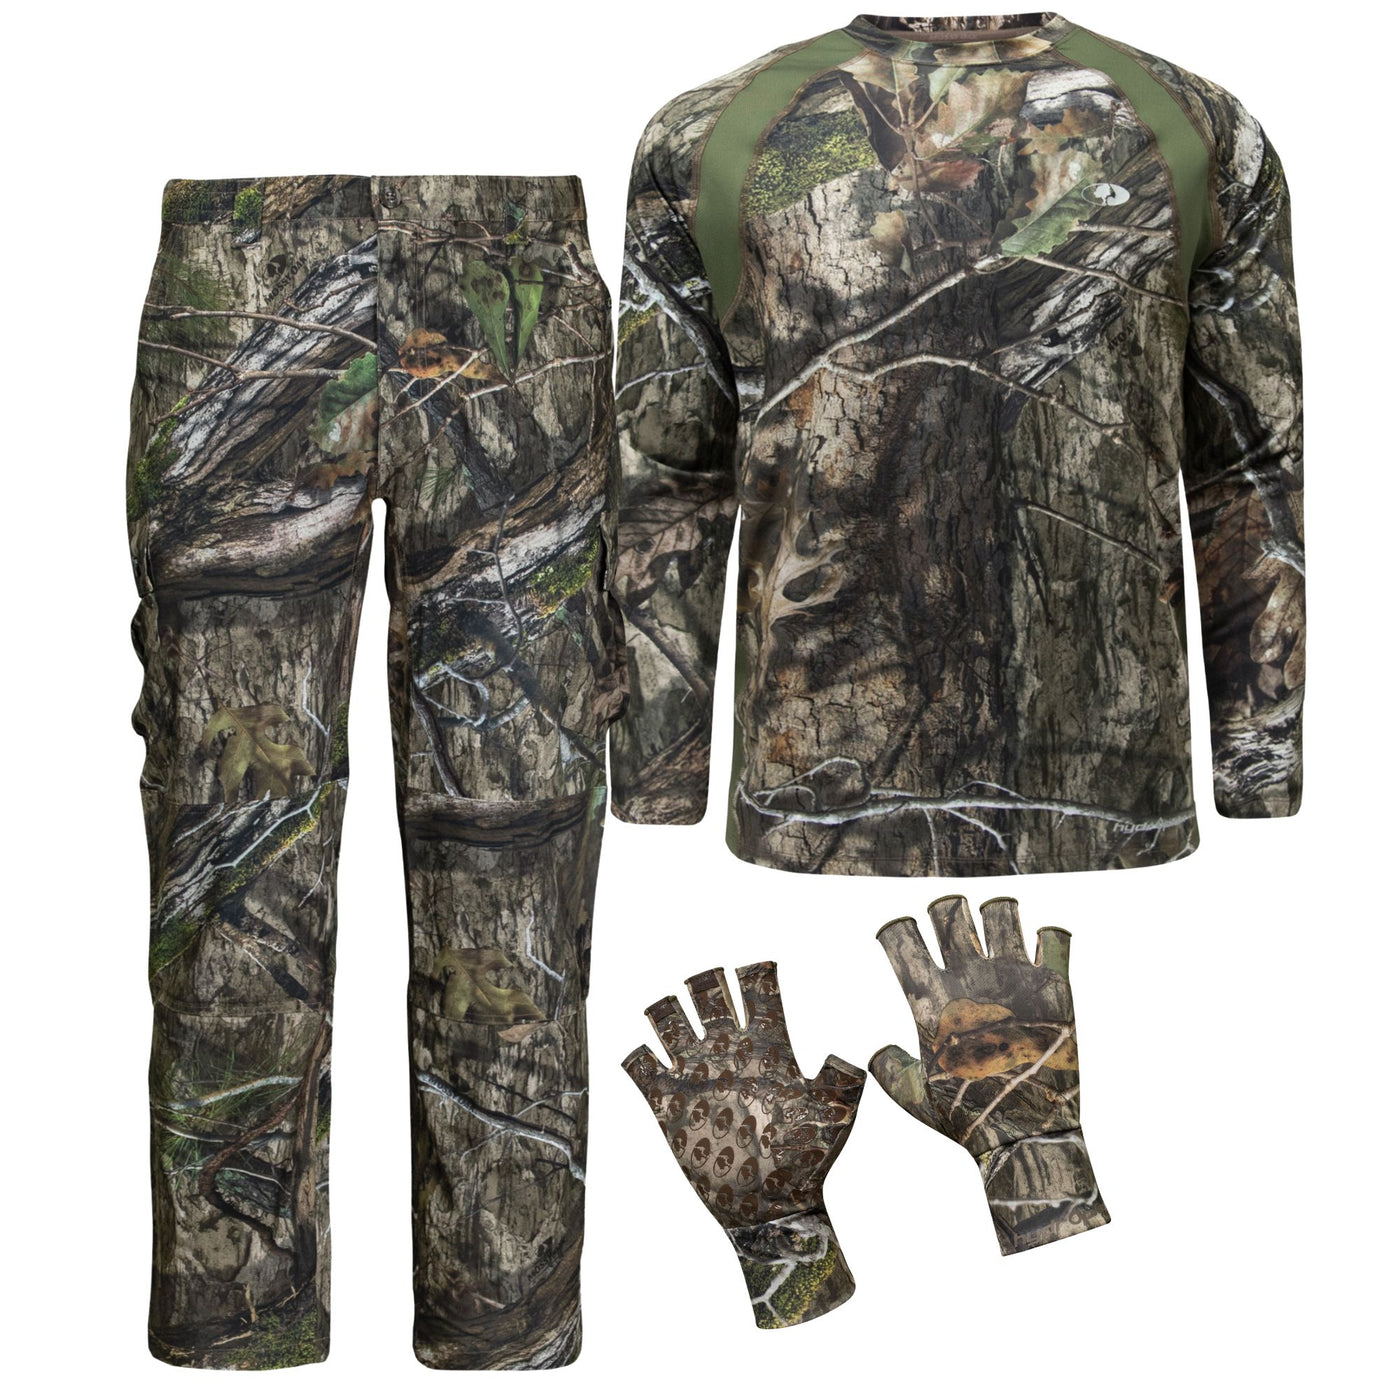 Mossy Oak Tibbee Flex Pant, Vented Shirt, and Fingerless Glove Bundle  Country DNA 